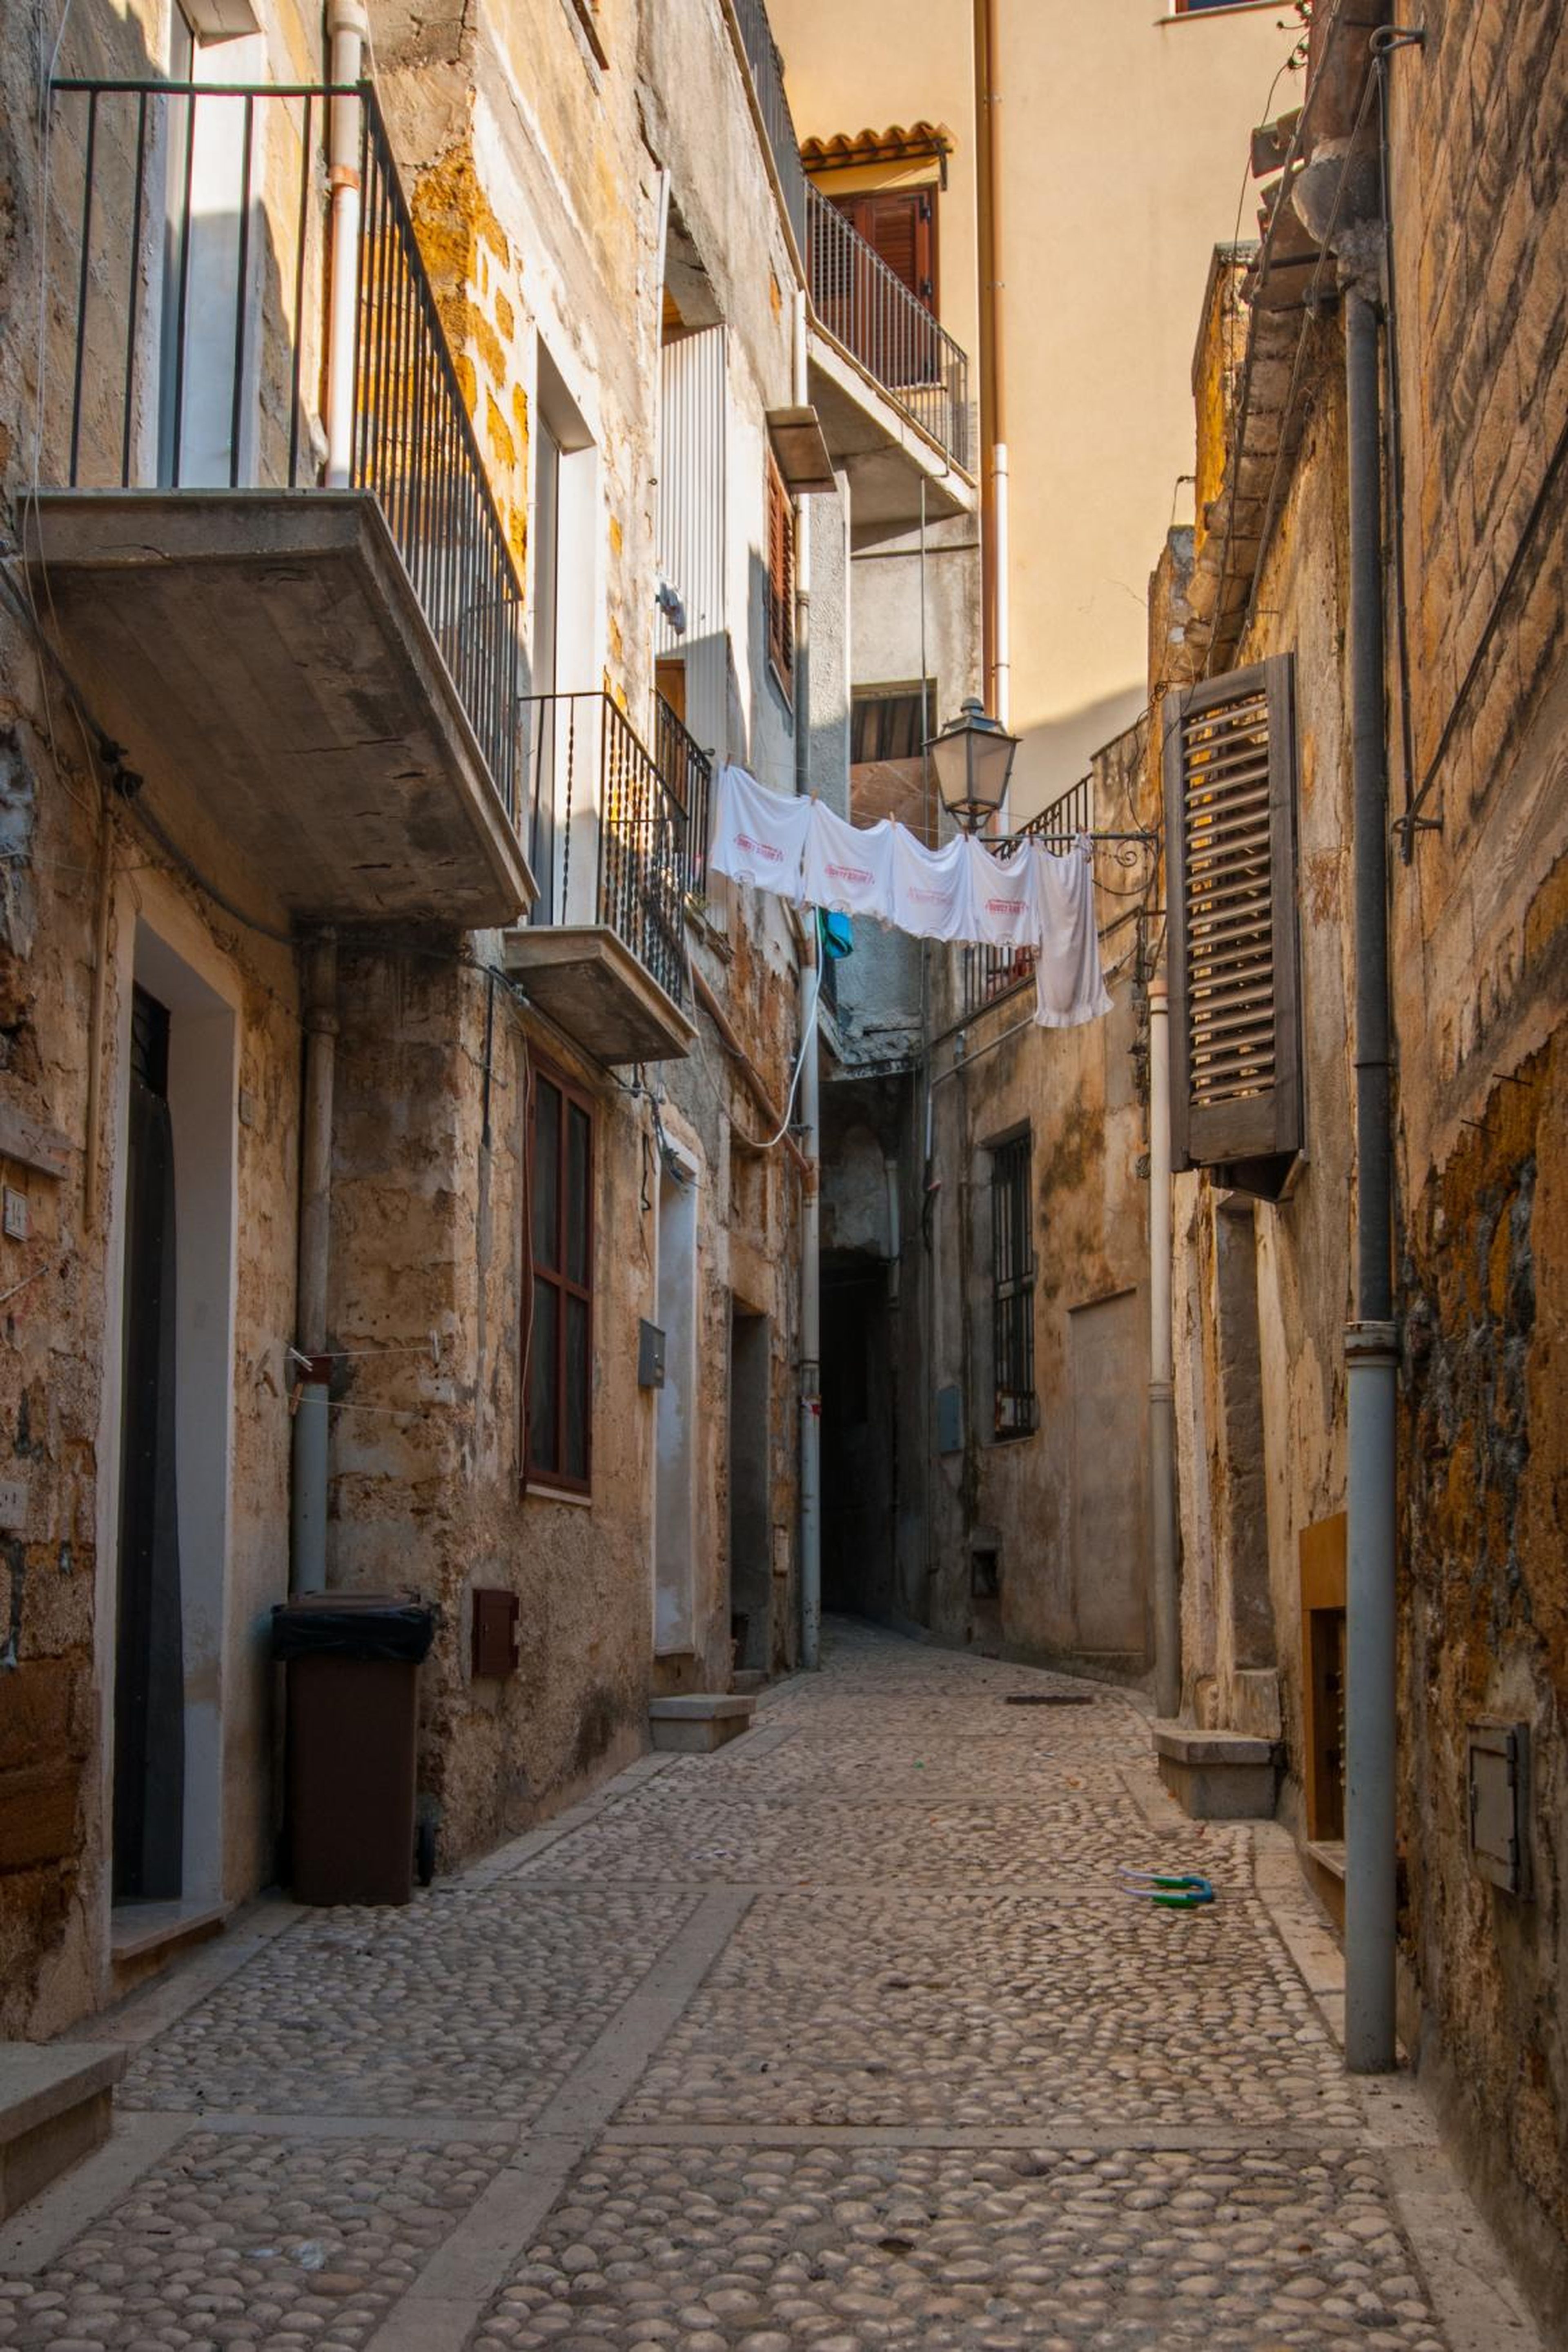 A picturesque town in Sicily is selling off homes for $1 to anyone willing to renovate them